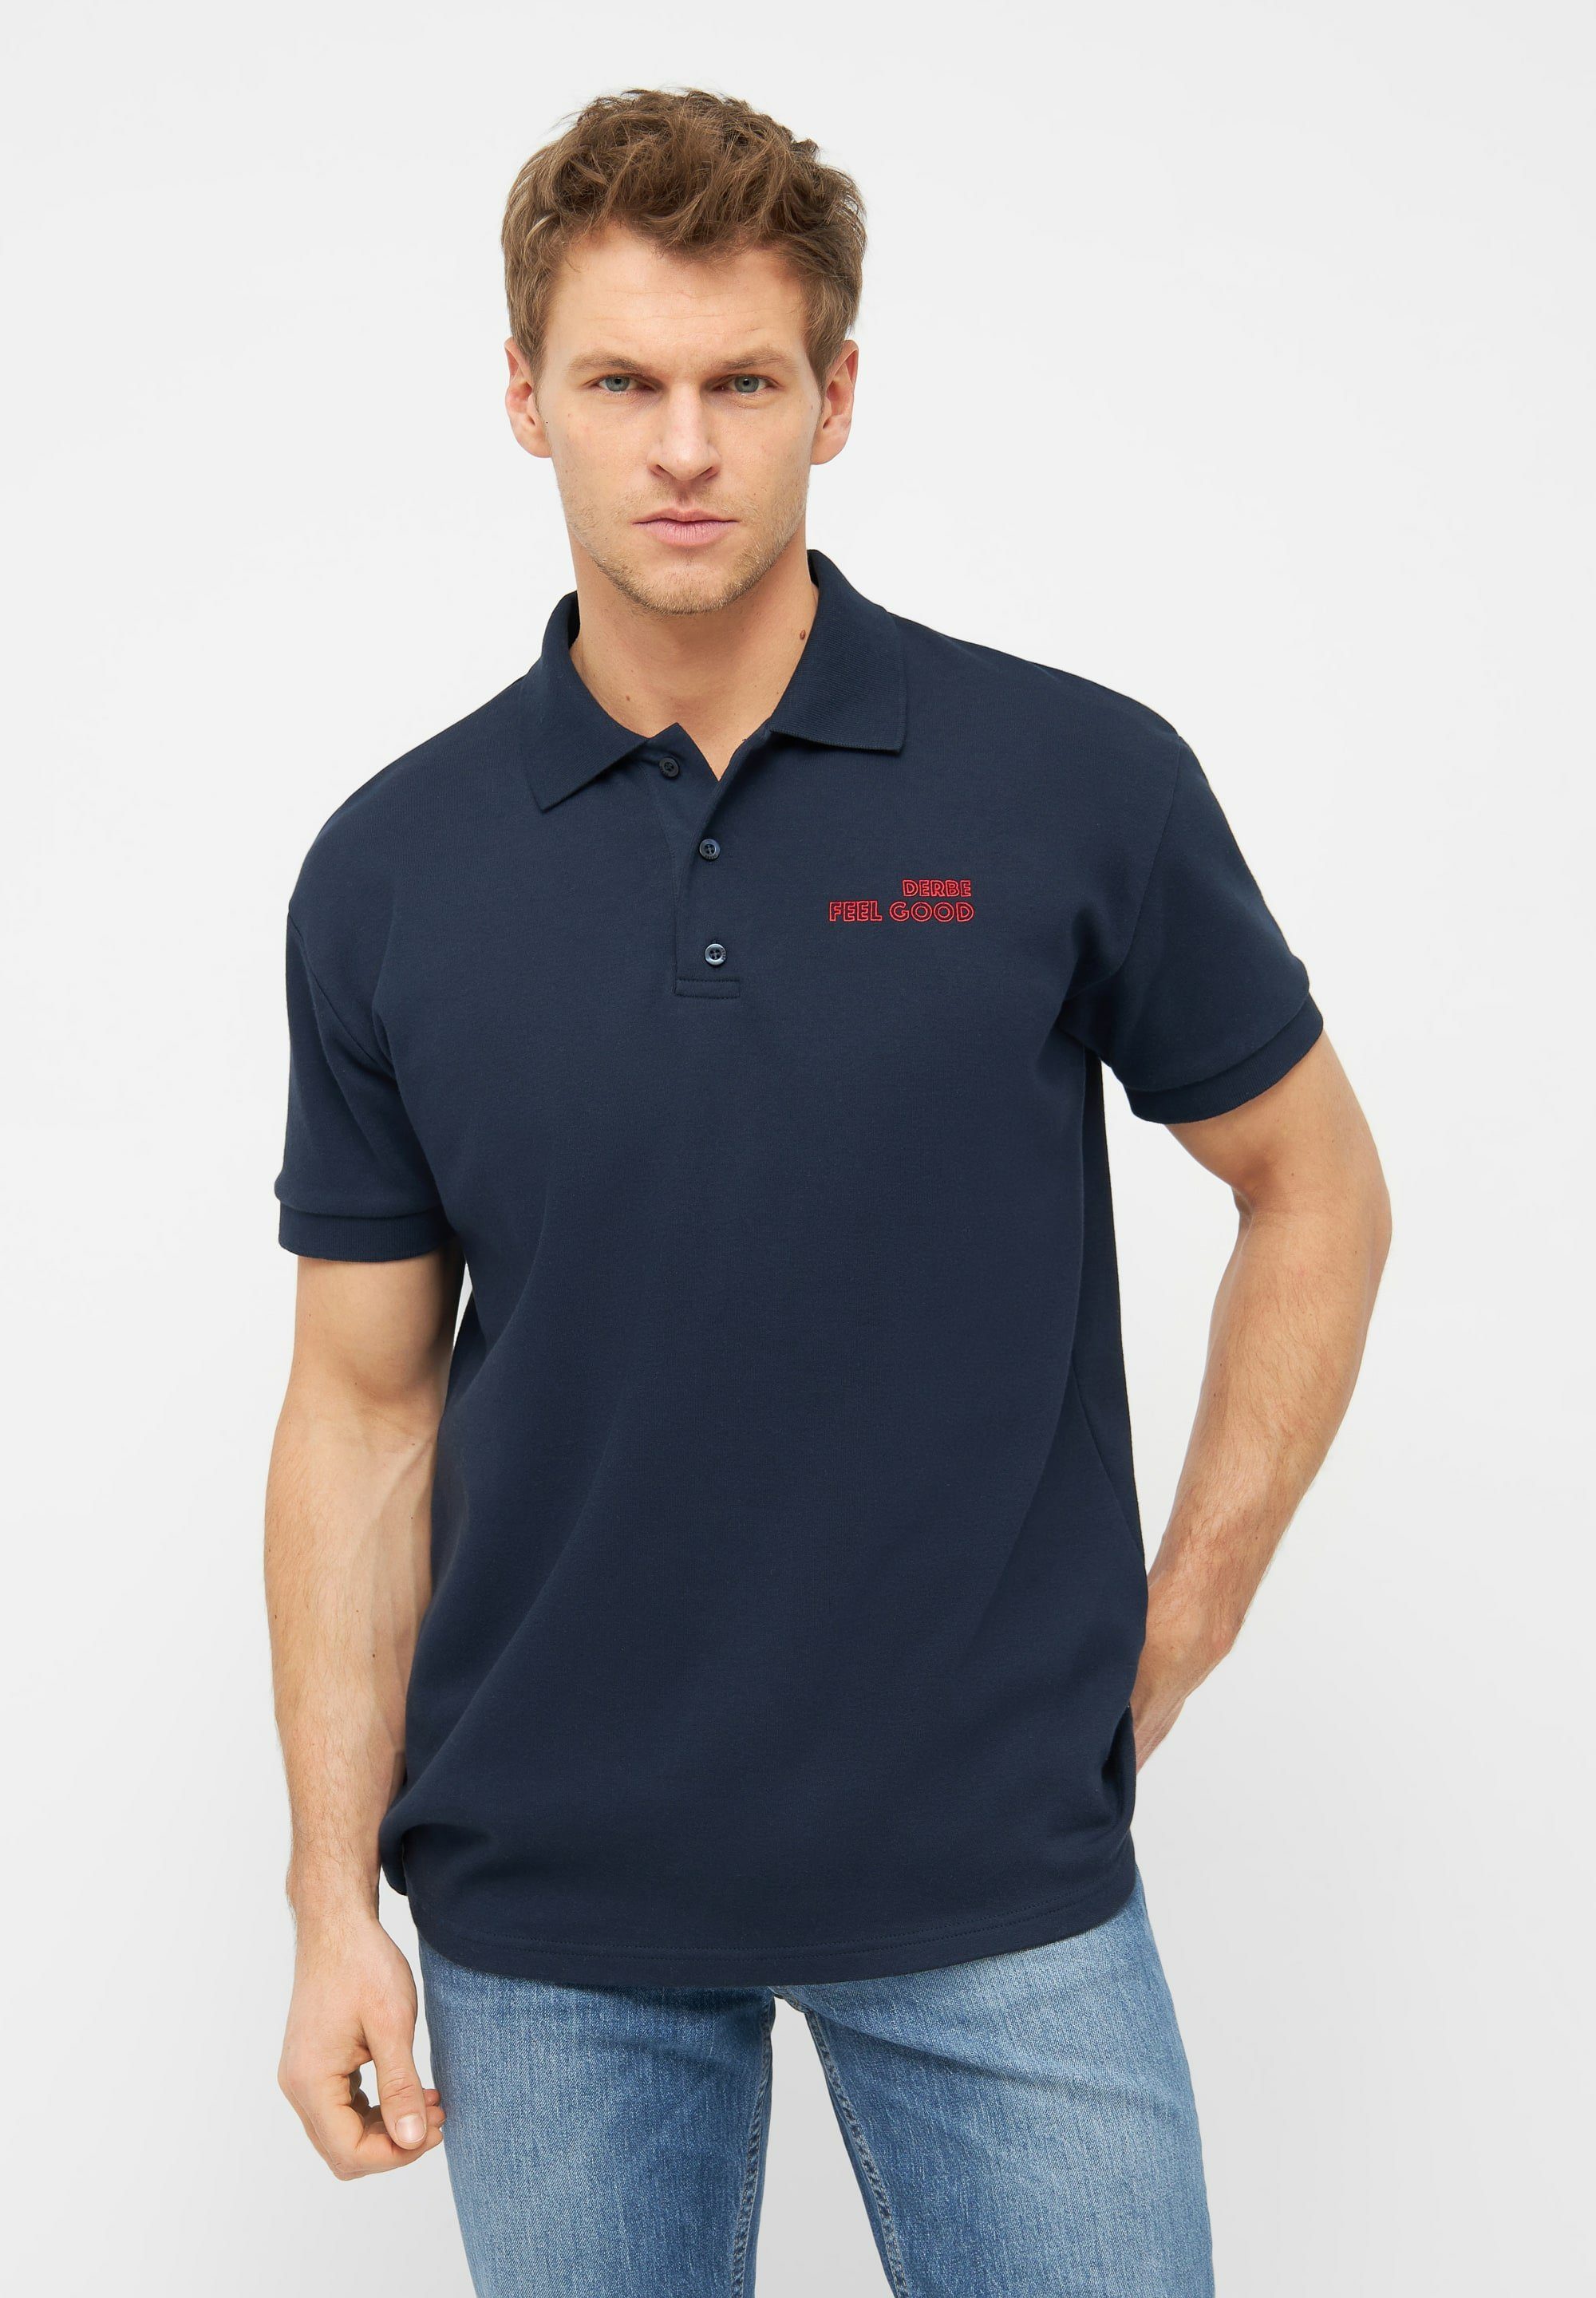 Derbe Poloshirt Portugal, Feel Good Qualität Made in tolle